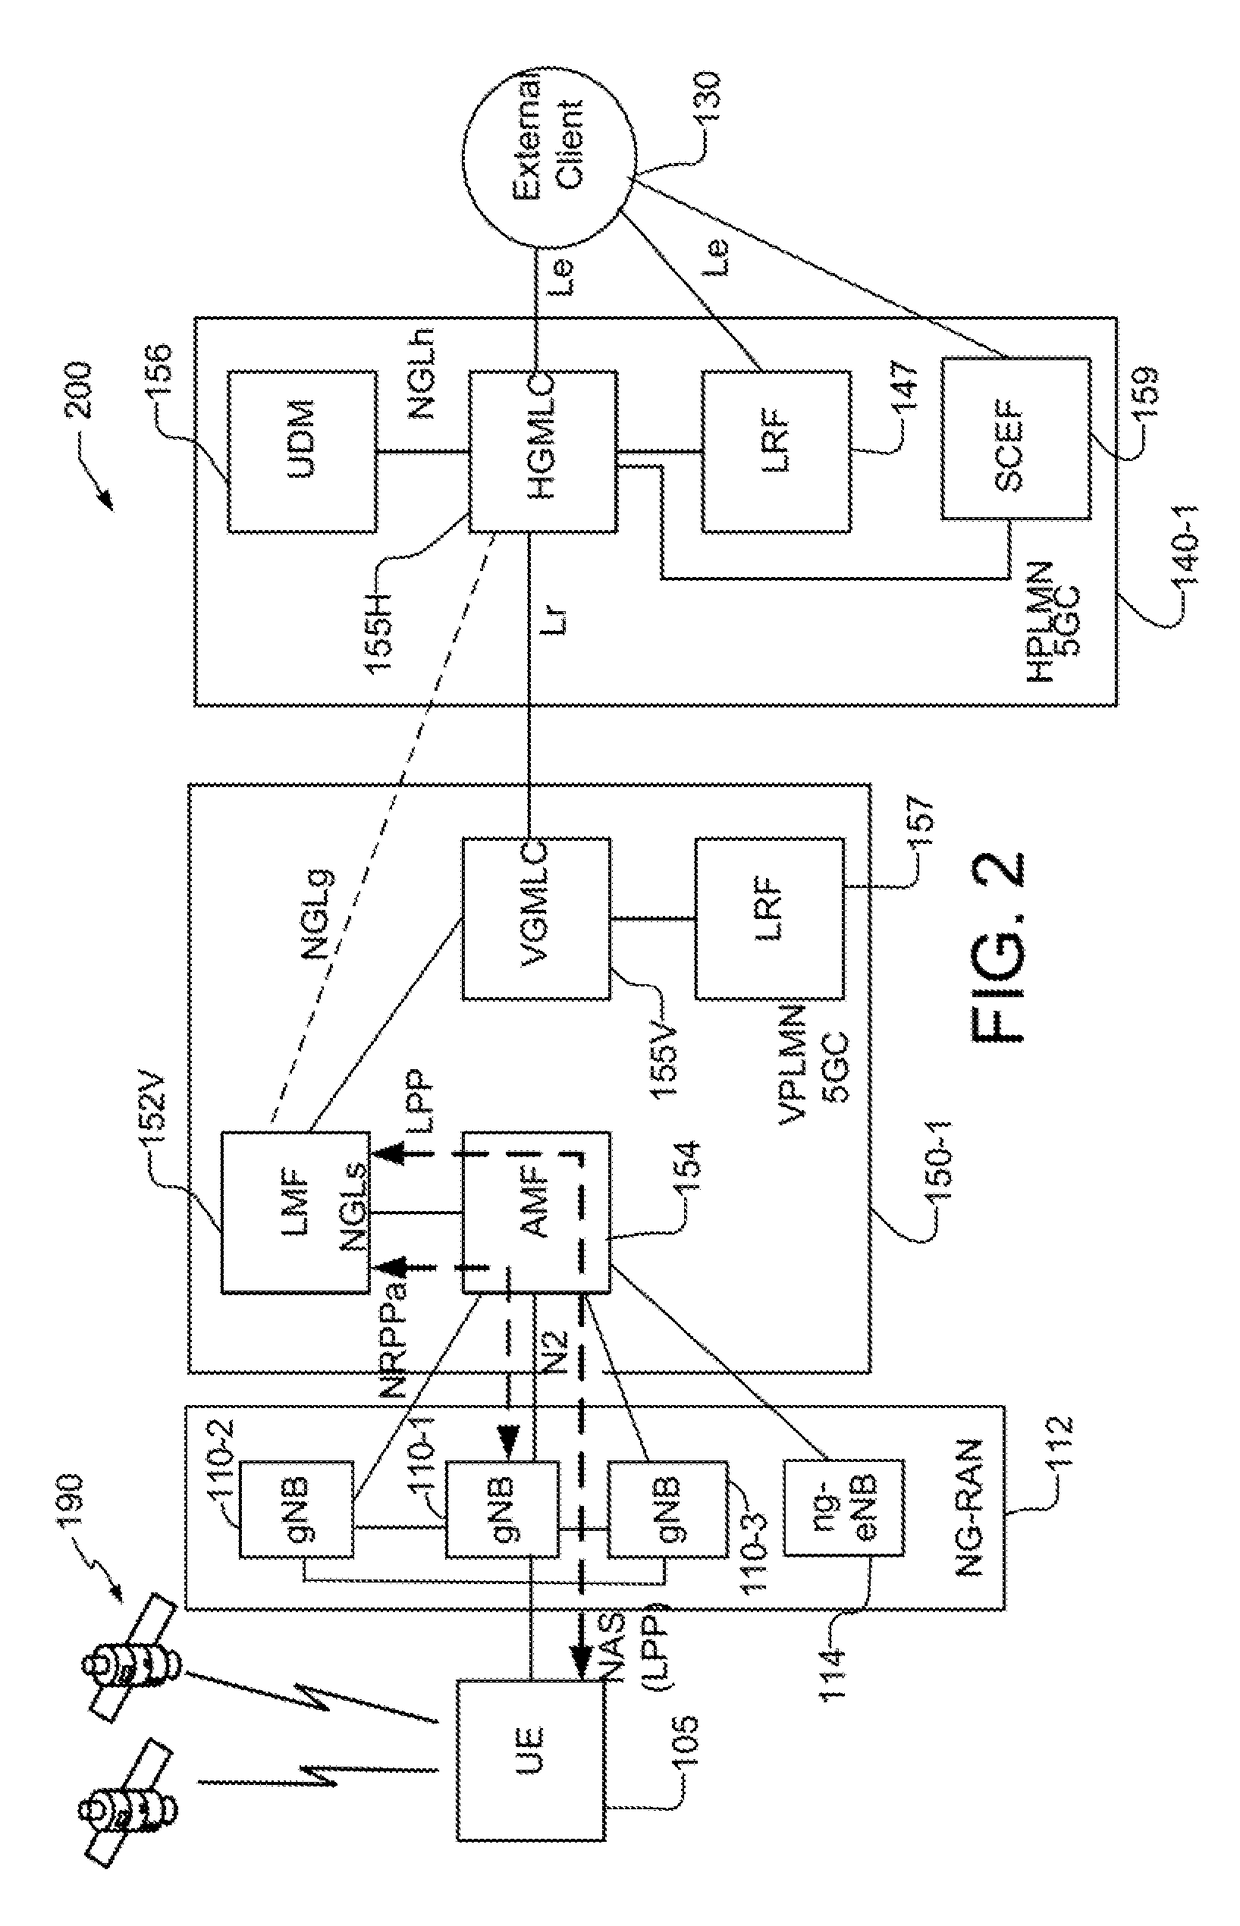 Systems and methods for supporting control plane location in a fifth generation wireless network